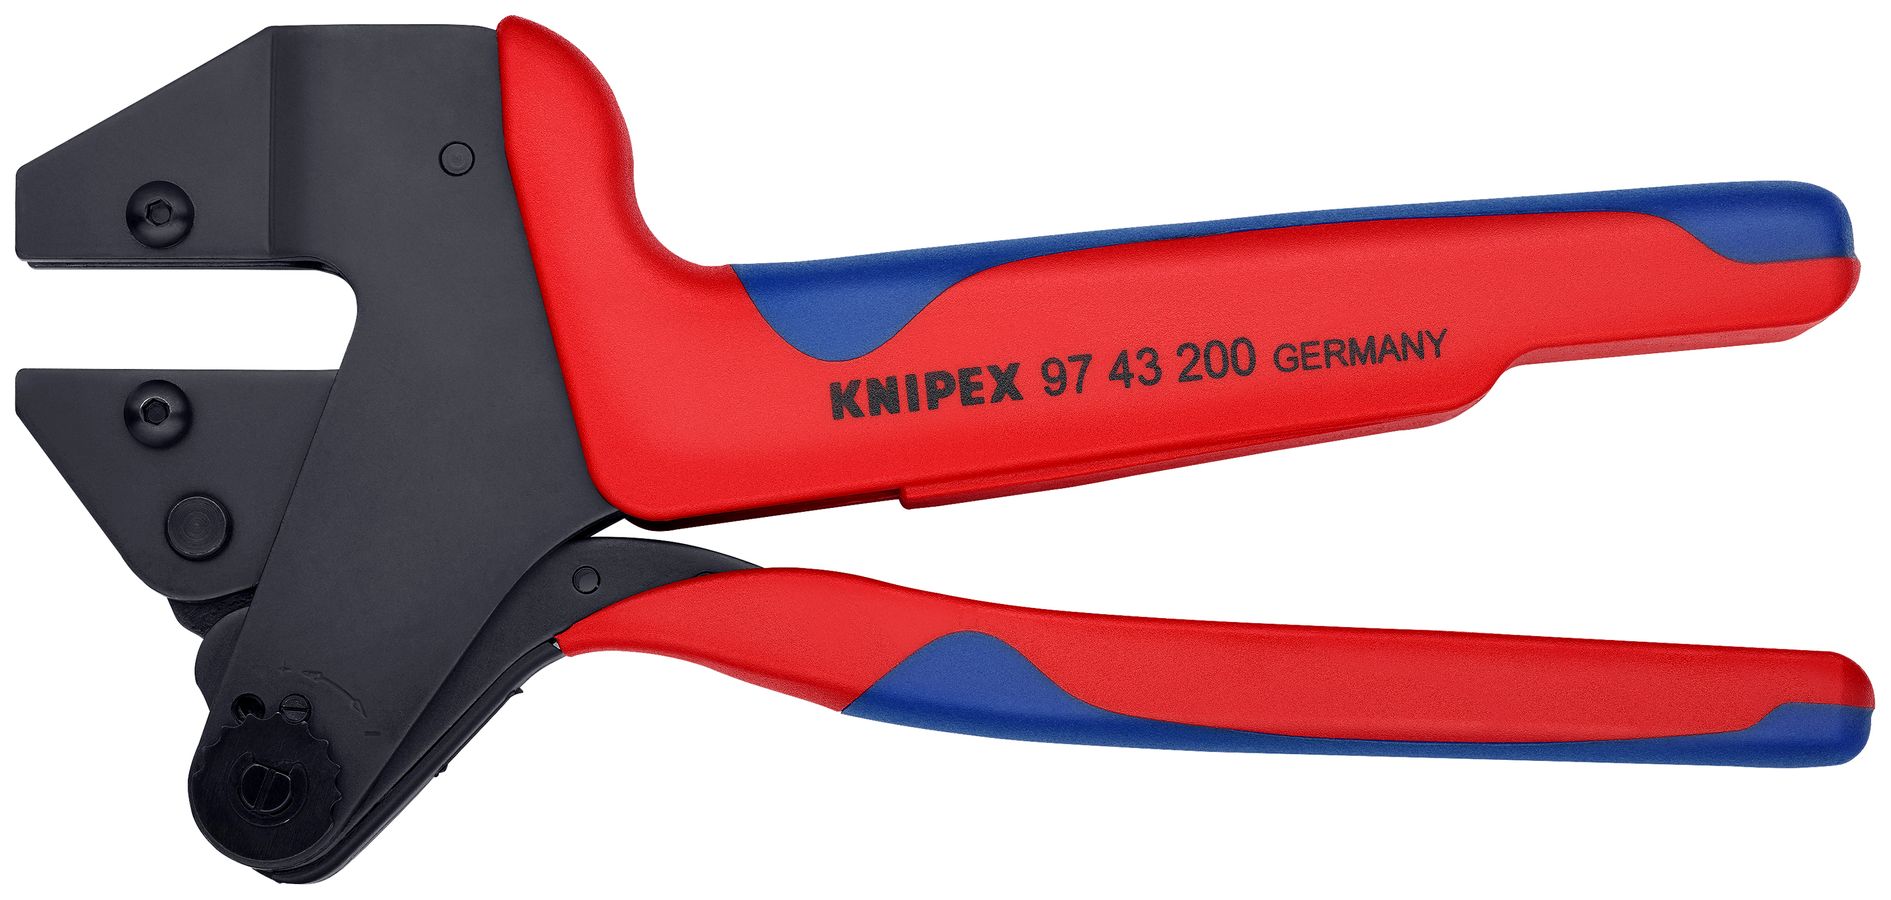 Crimp System Pliers | KNIPEX Tools